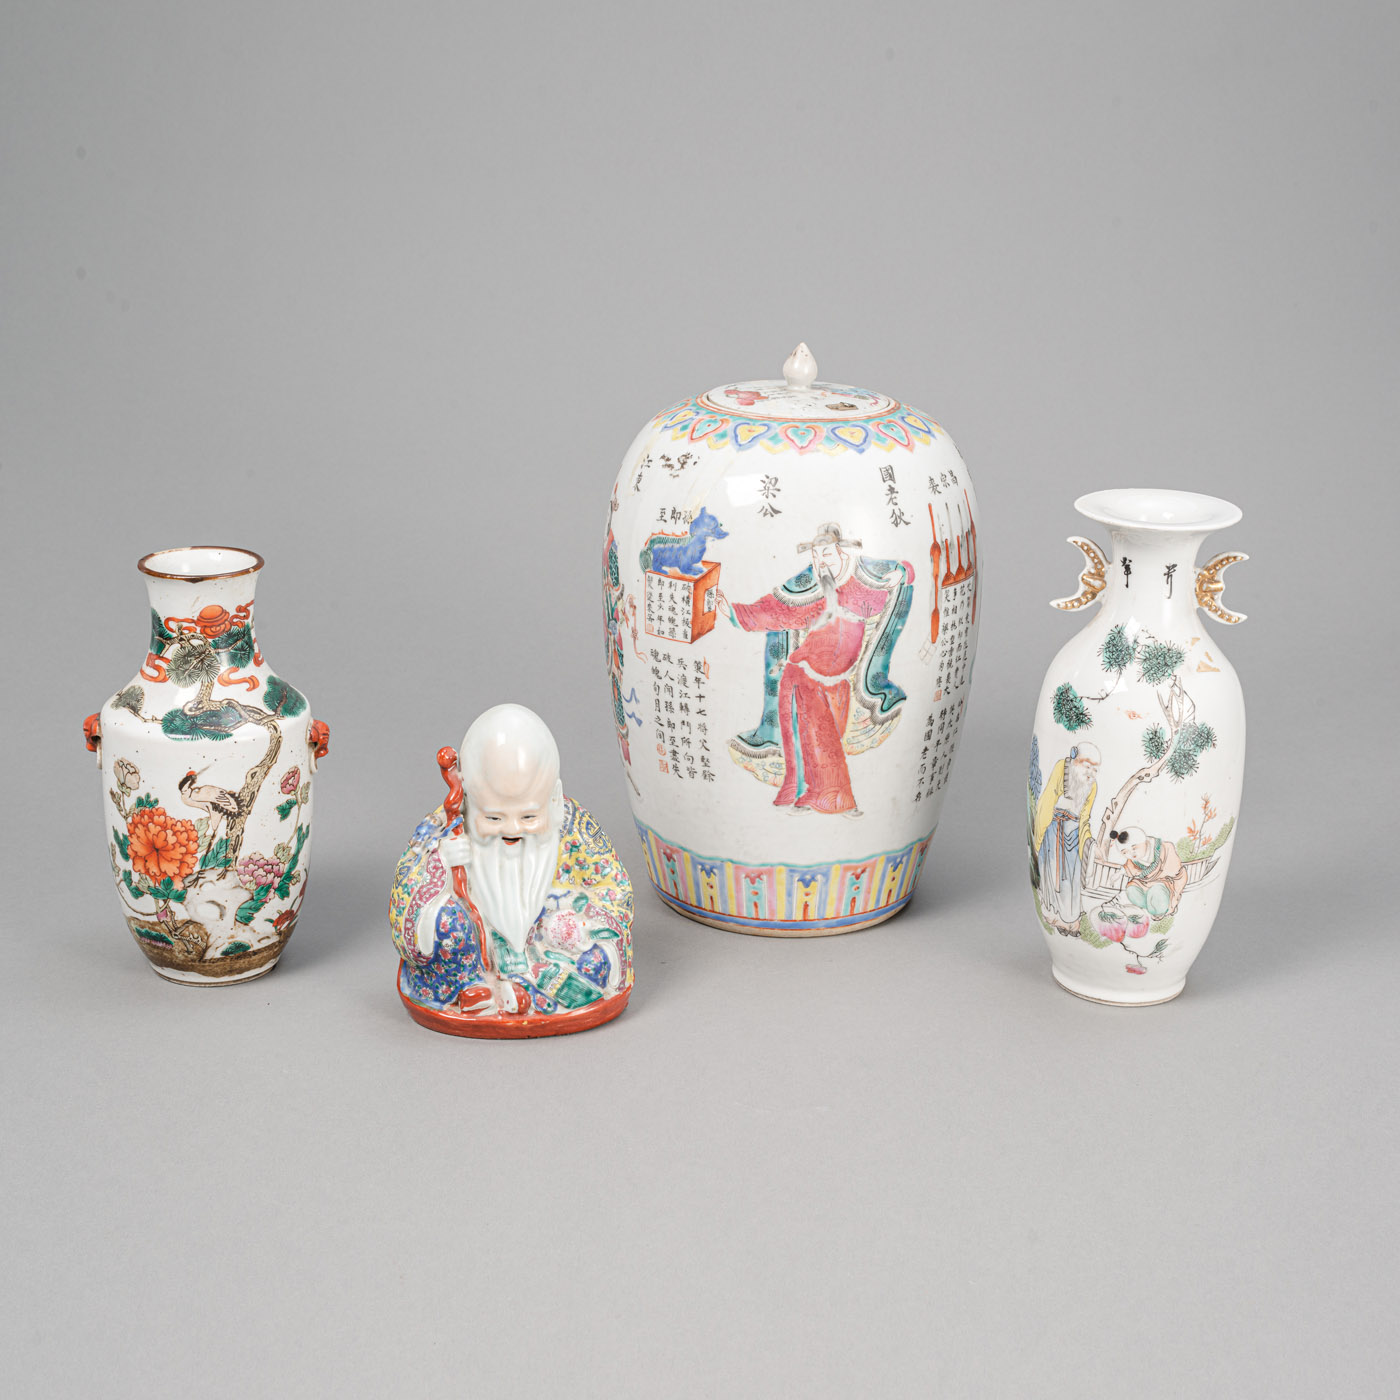 <b>A 'WU SHUANG PU' PORCELAIN VASE WITH COVER, TWO SMALLER 'FAMILLE ROSE' VASES, AND A SHOULAO</b>